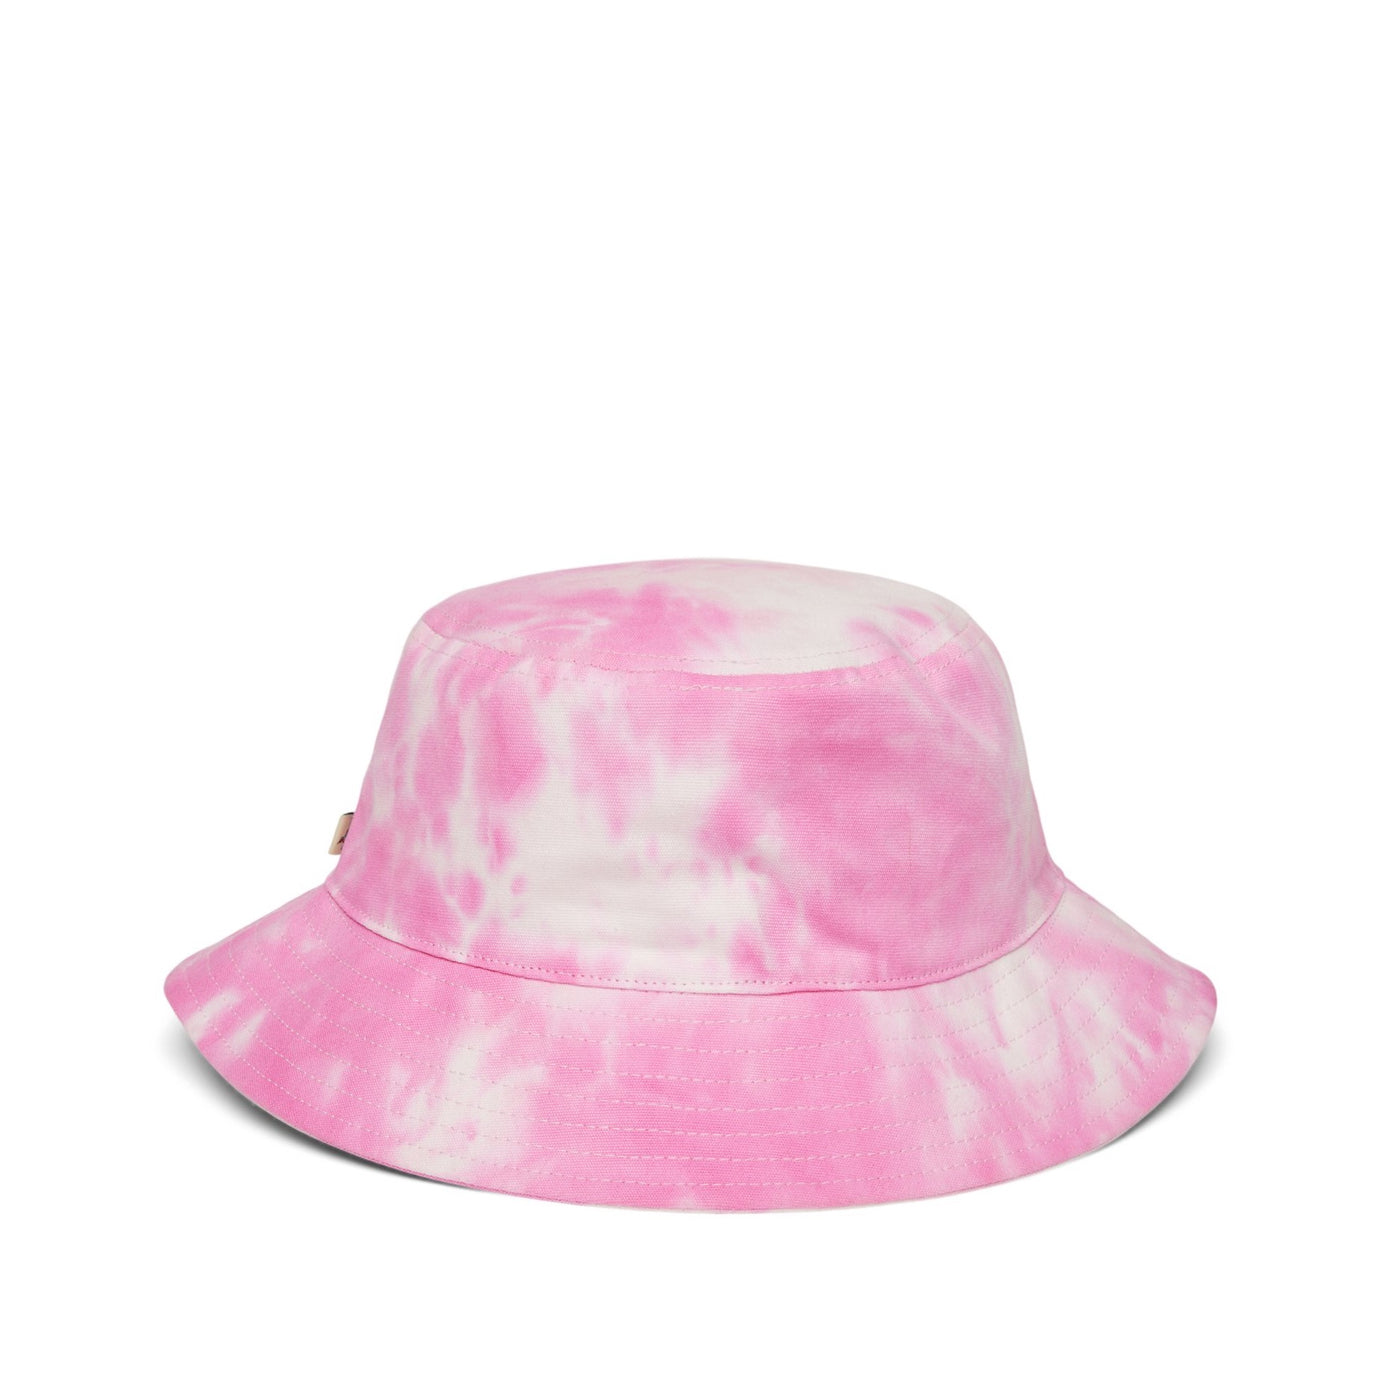 'YOU ARE ON NATIVE LAND'  BUCKET HAT - PINK TIE DYE